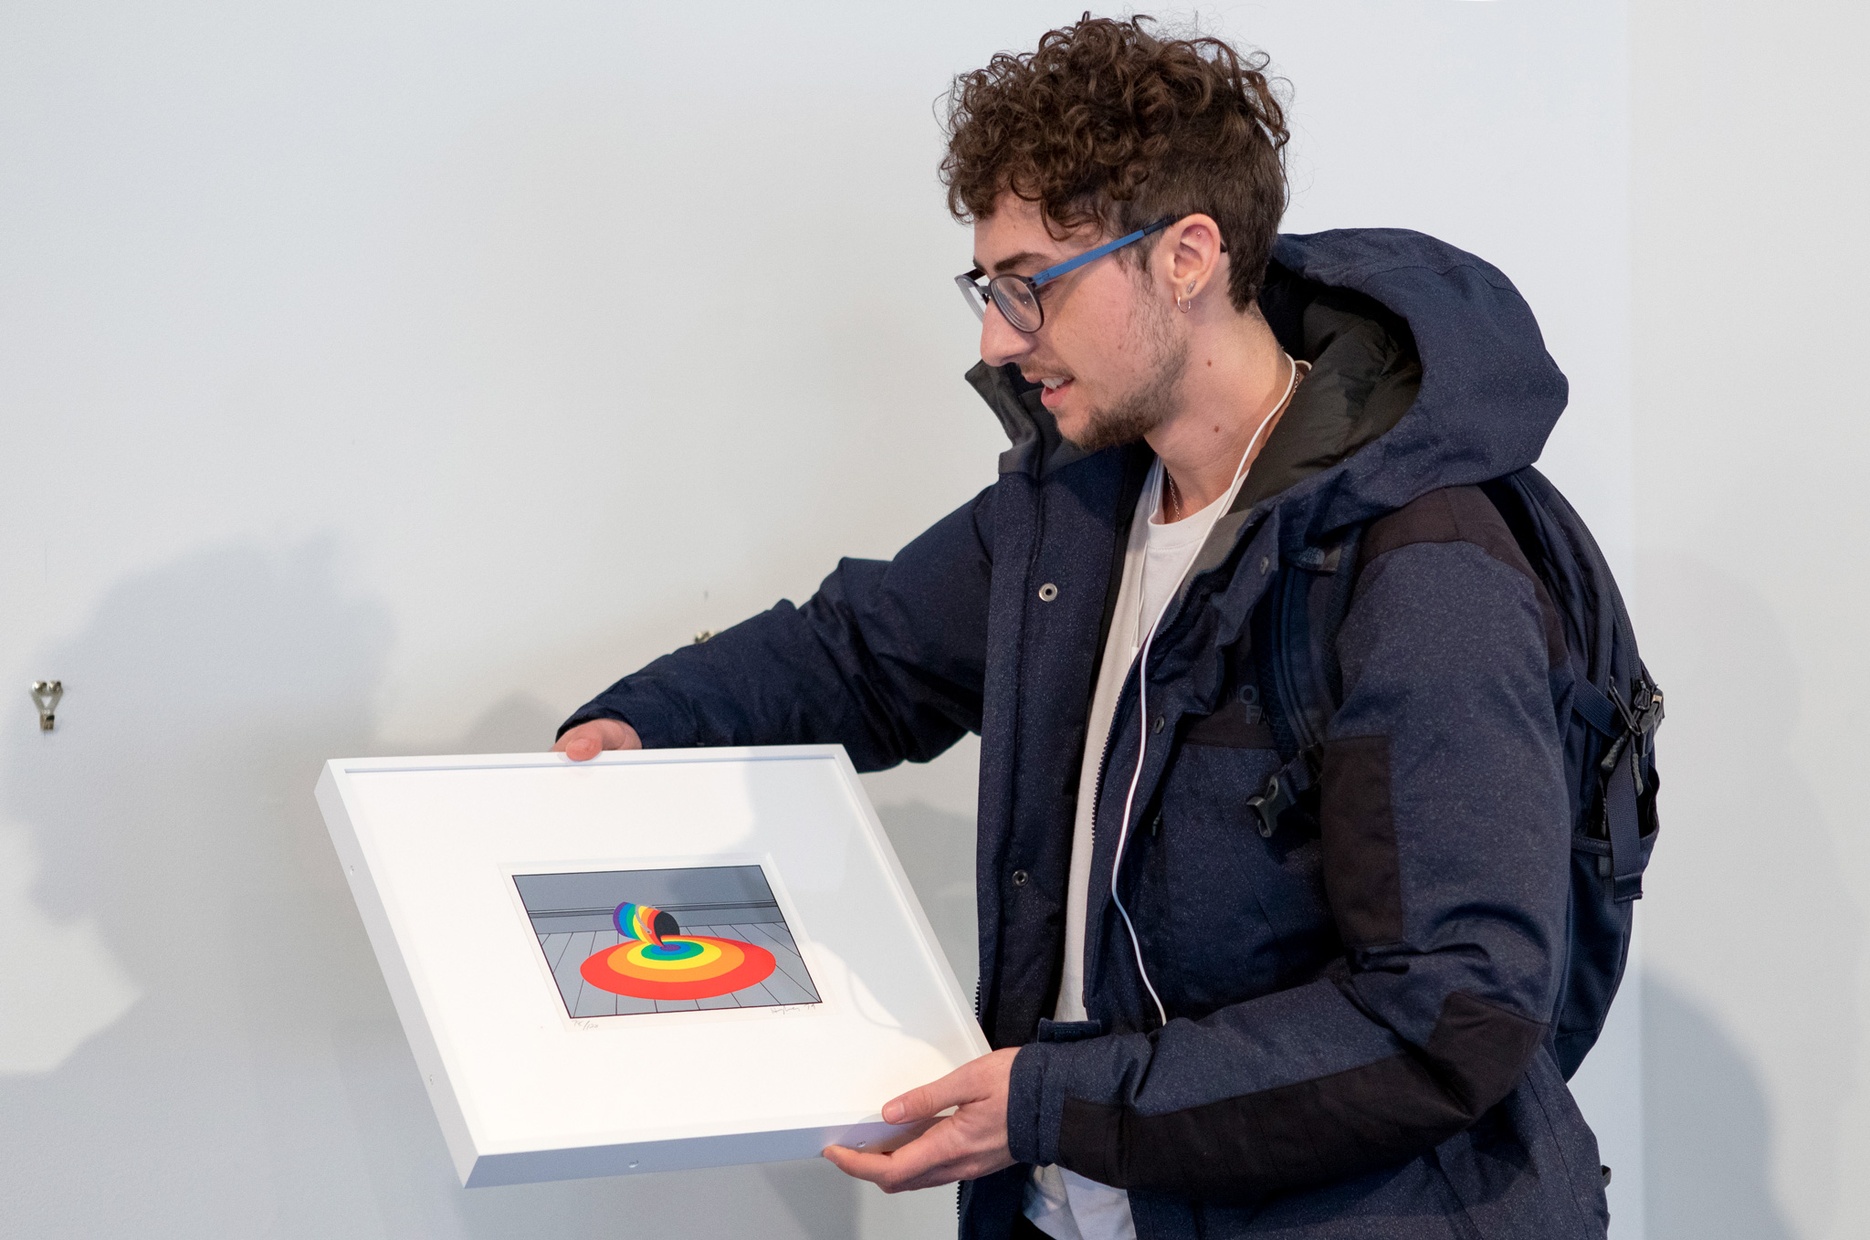 A man is looking down at the framed artwork he is holding by artist Patrick Hughes, which depicts a rainbow paint bucket spilling rainbow paint.